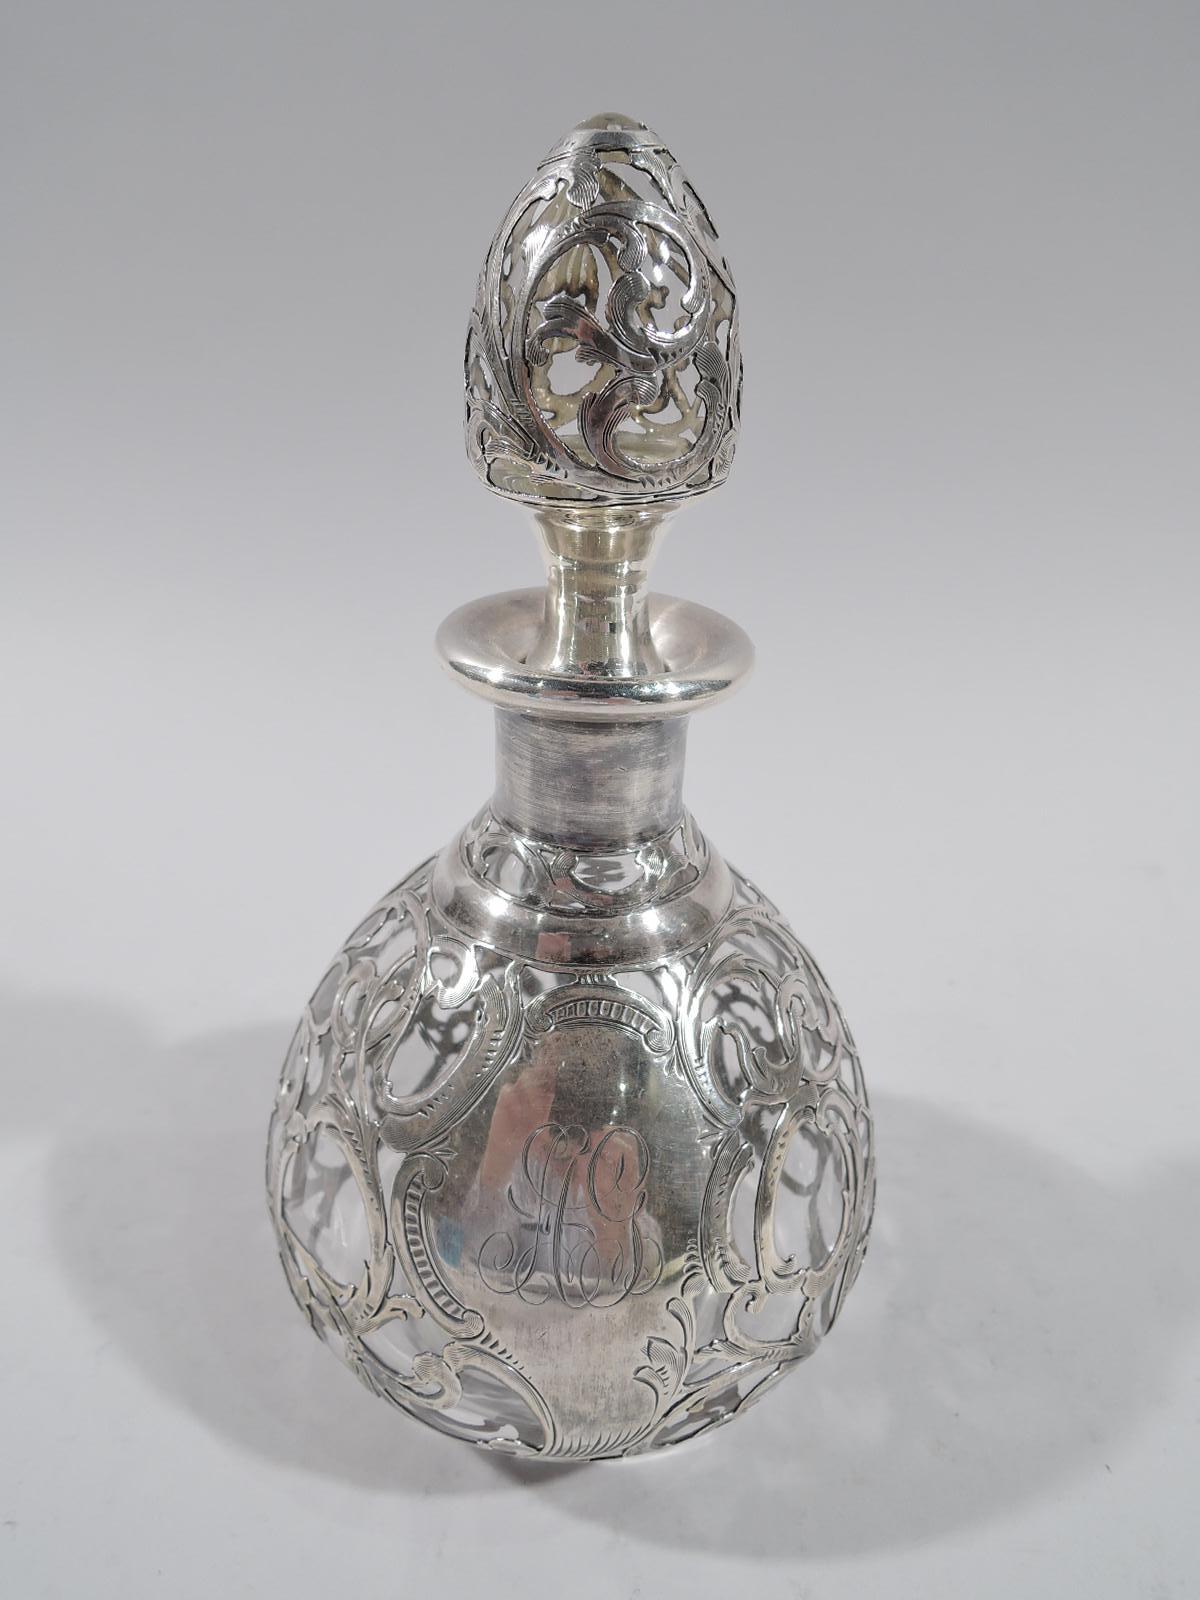 Turn-of-the-century American Art Nouveau glass perfume with engraved silver overlay. Ovoid bottle with short neck and everted rim in silver collar. Stopper ovoid with concave neck in same. Dense overlay in form of entwined and scrolling tendrils and